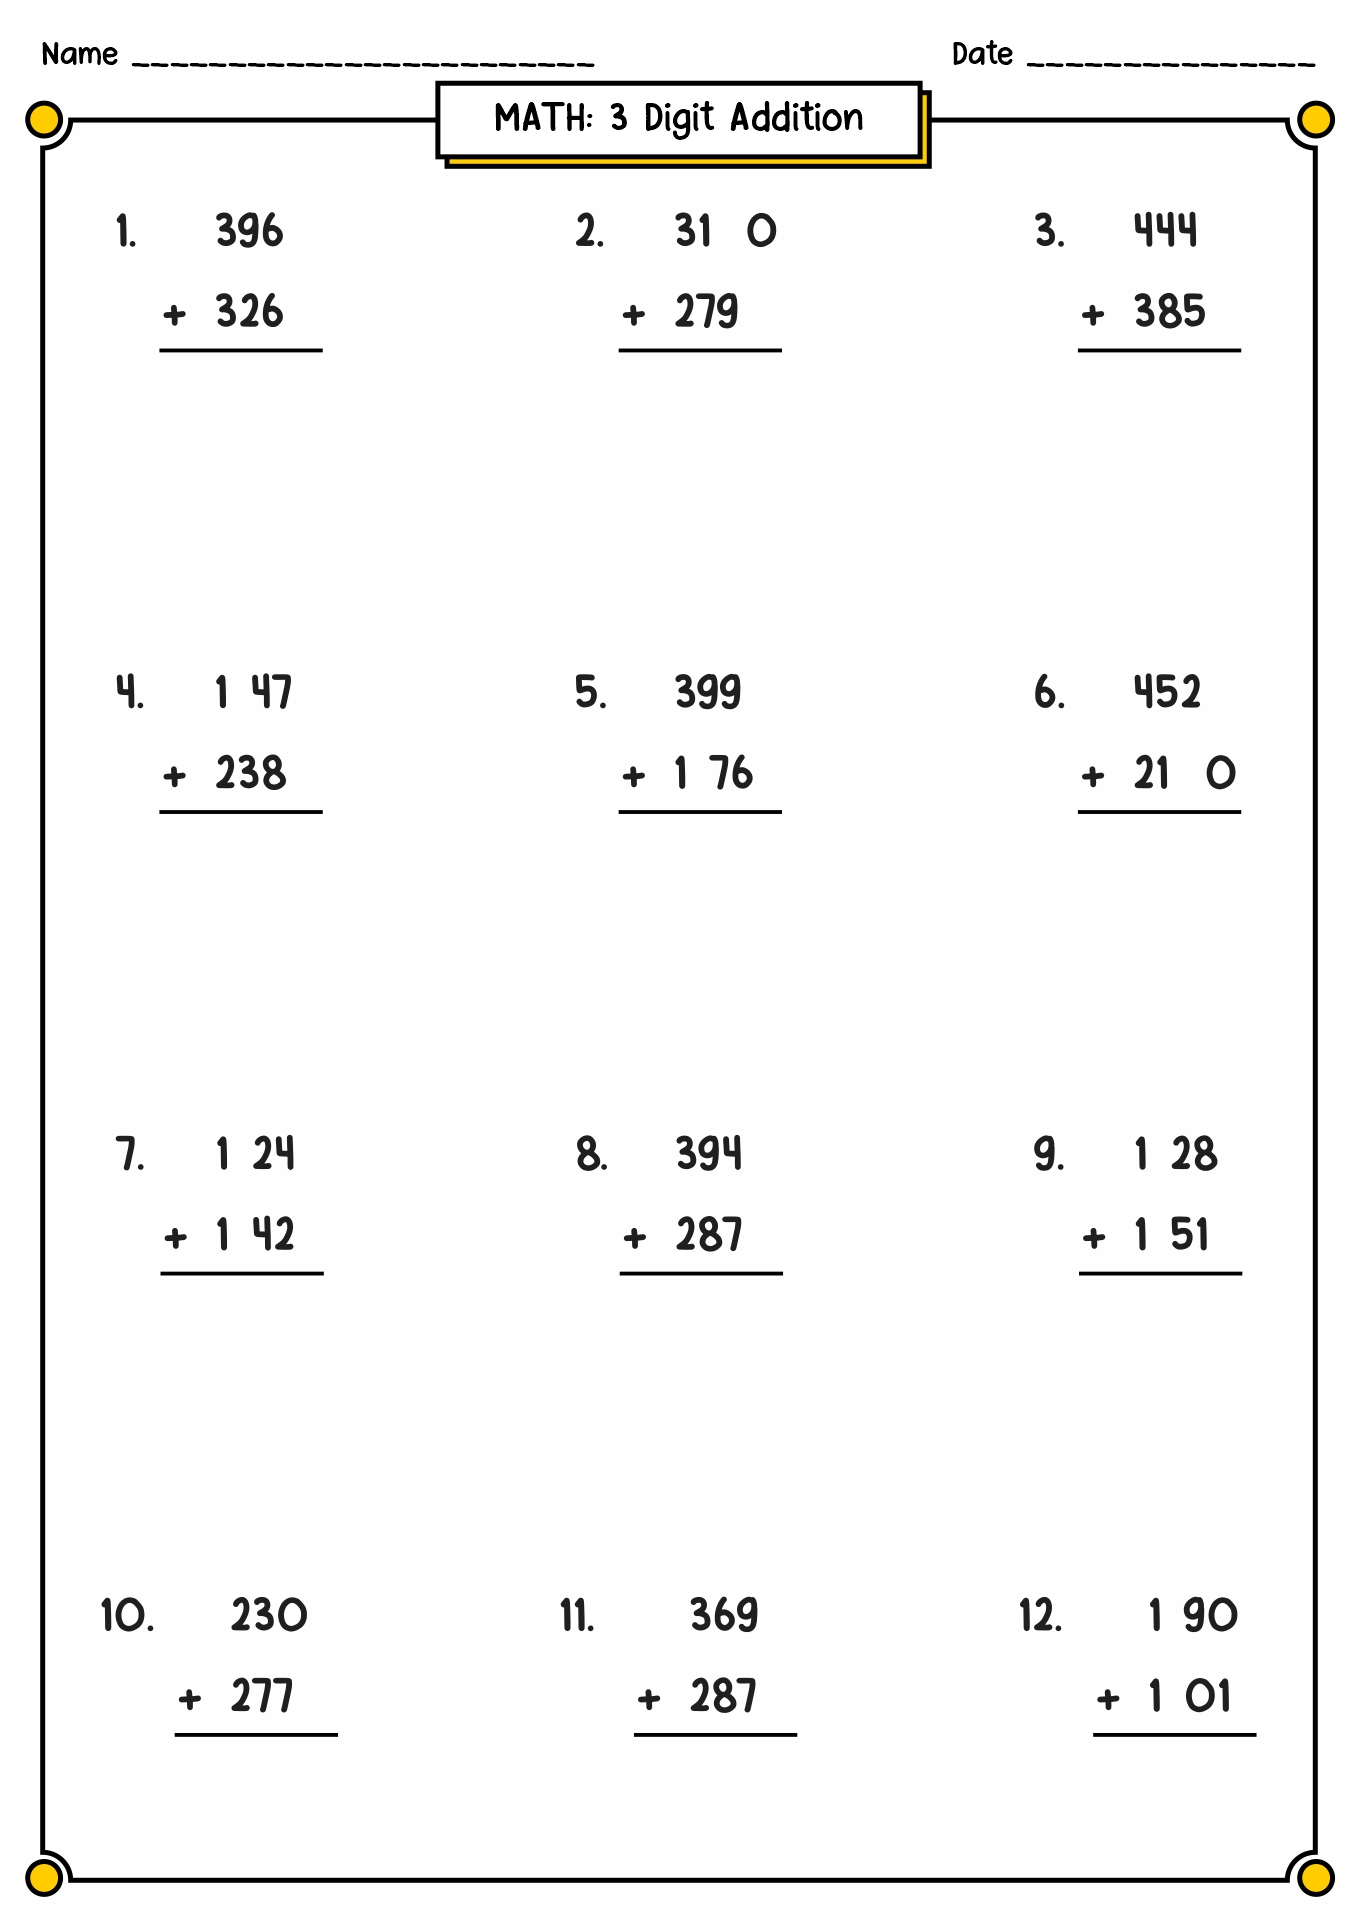 3-Digit Addition with Regrouping Image